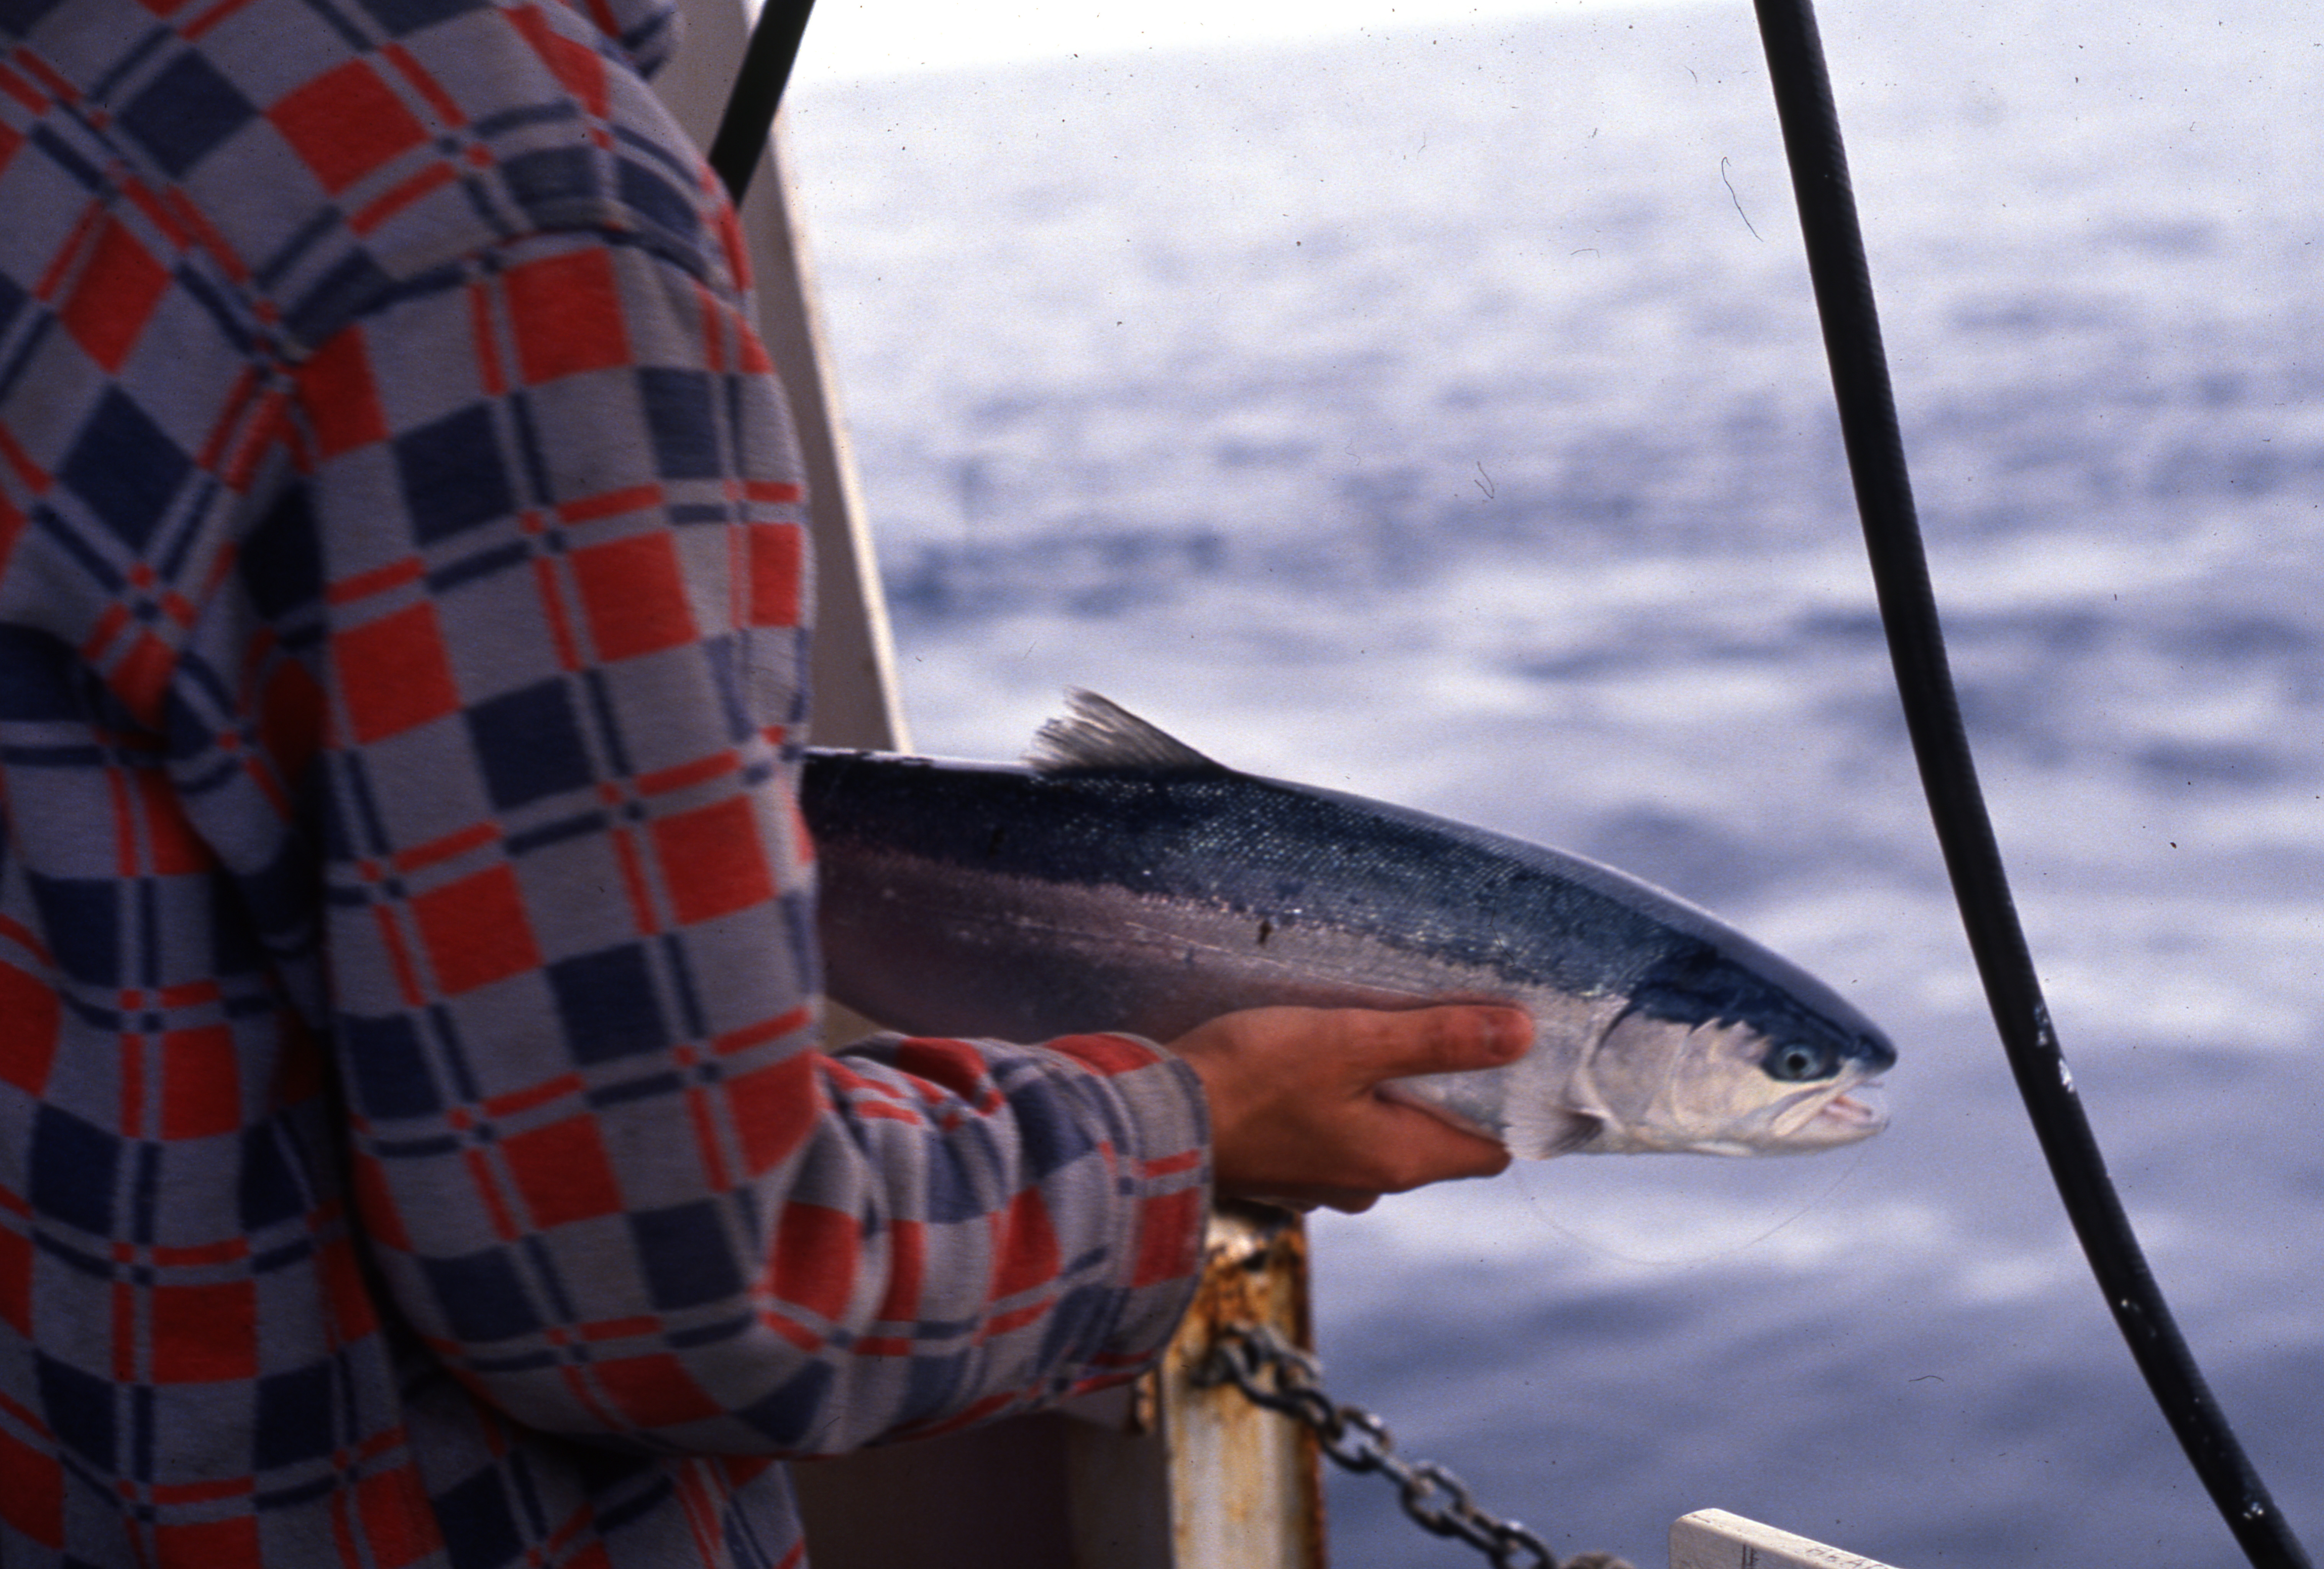 A steelhead trout caught aboard the W.E. Ricker in 1990 is set to be released after tagging.